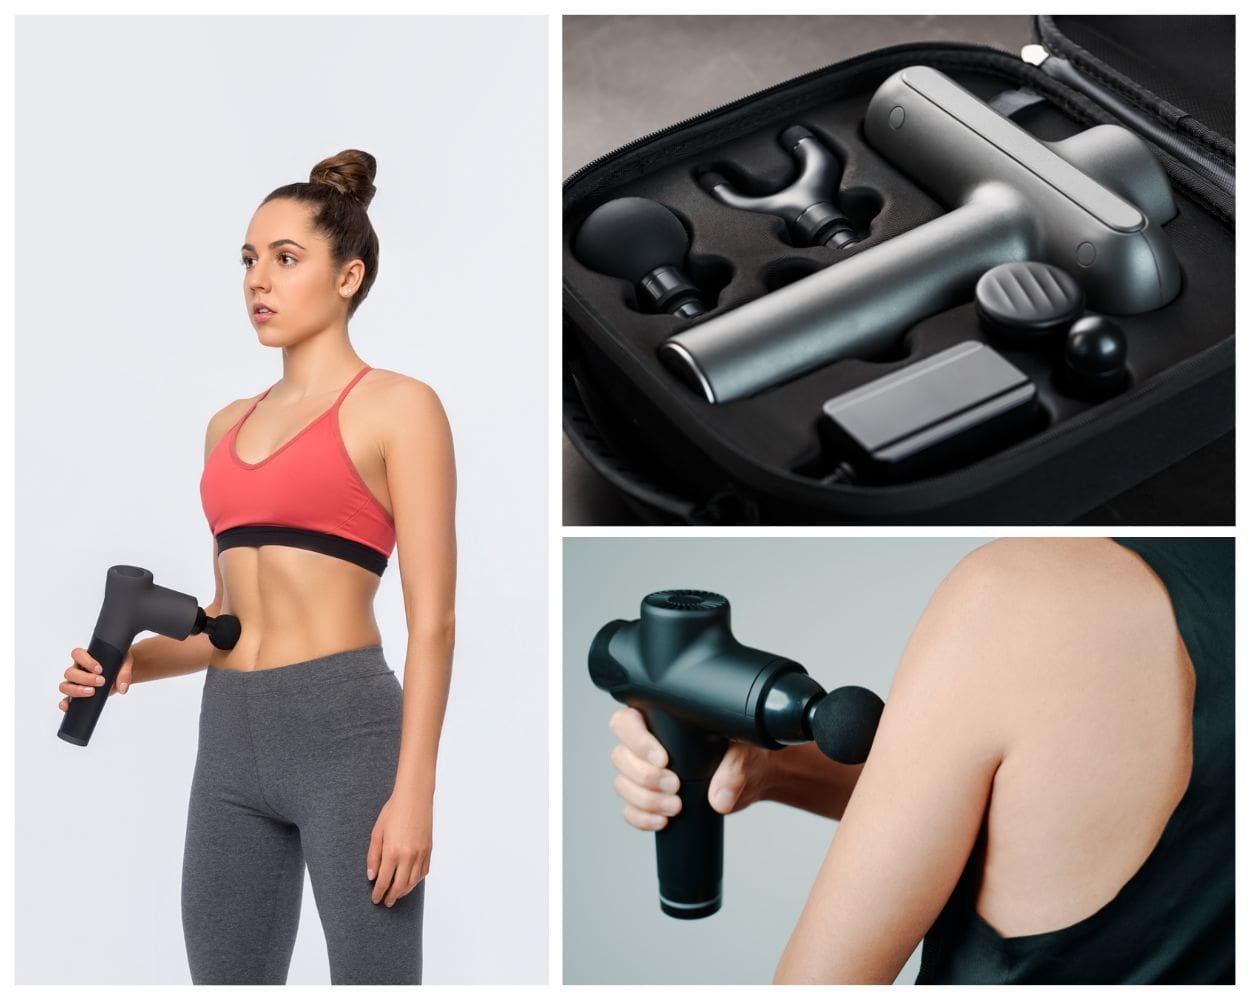 Body Massager Works for Pain Relief